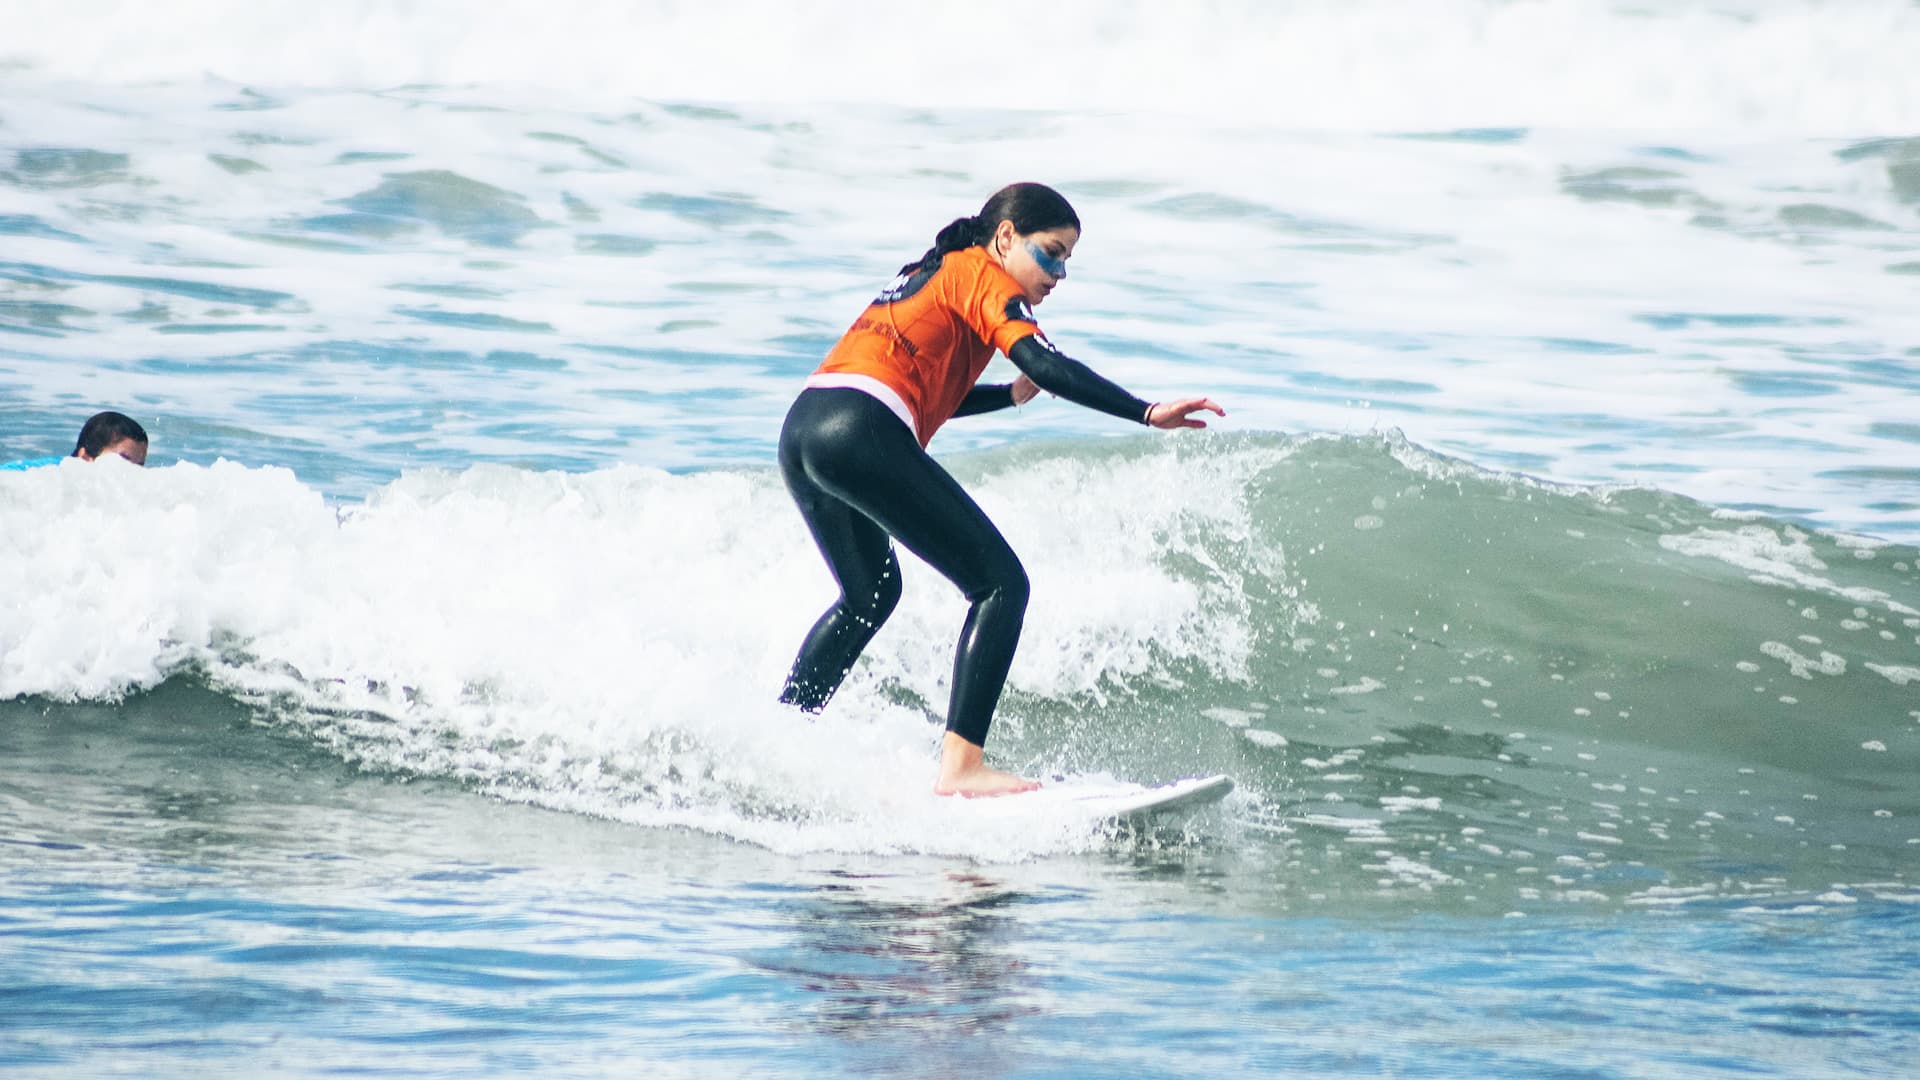 Is surfing a high risk sport?